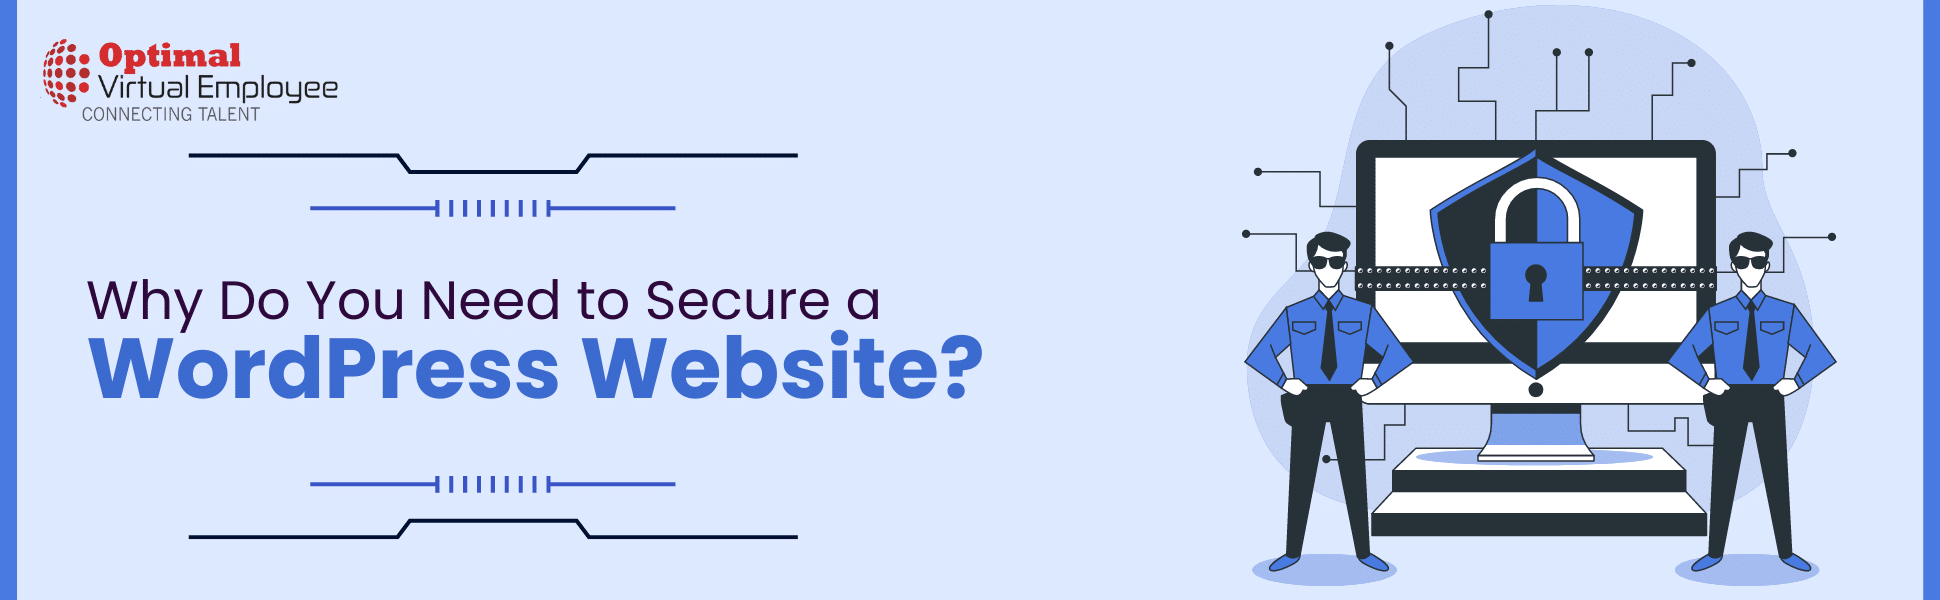 Why Do You Need to Secure a WordPress Website